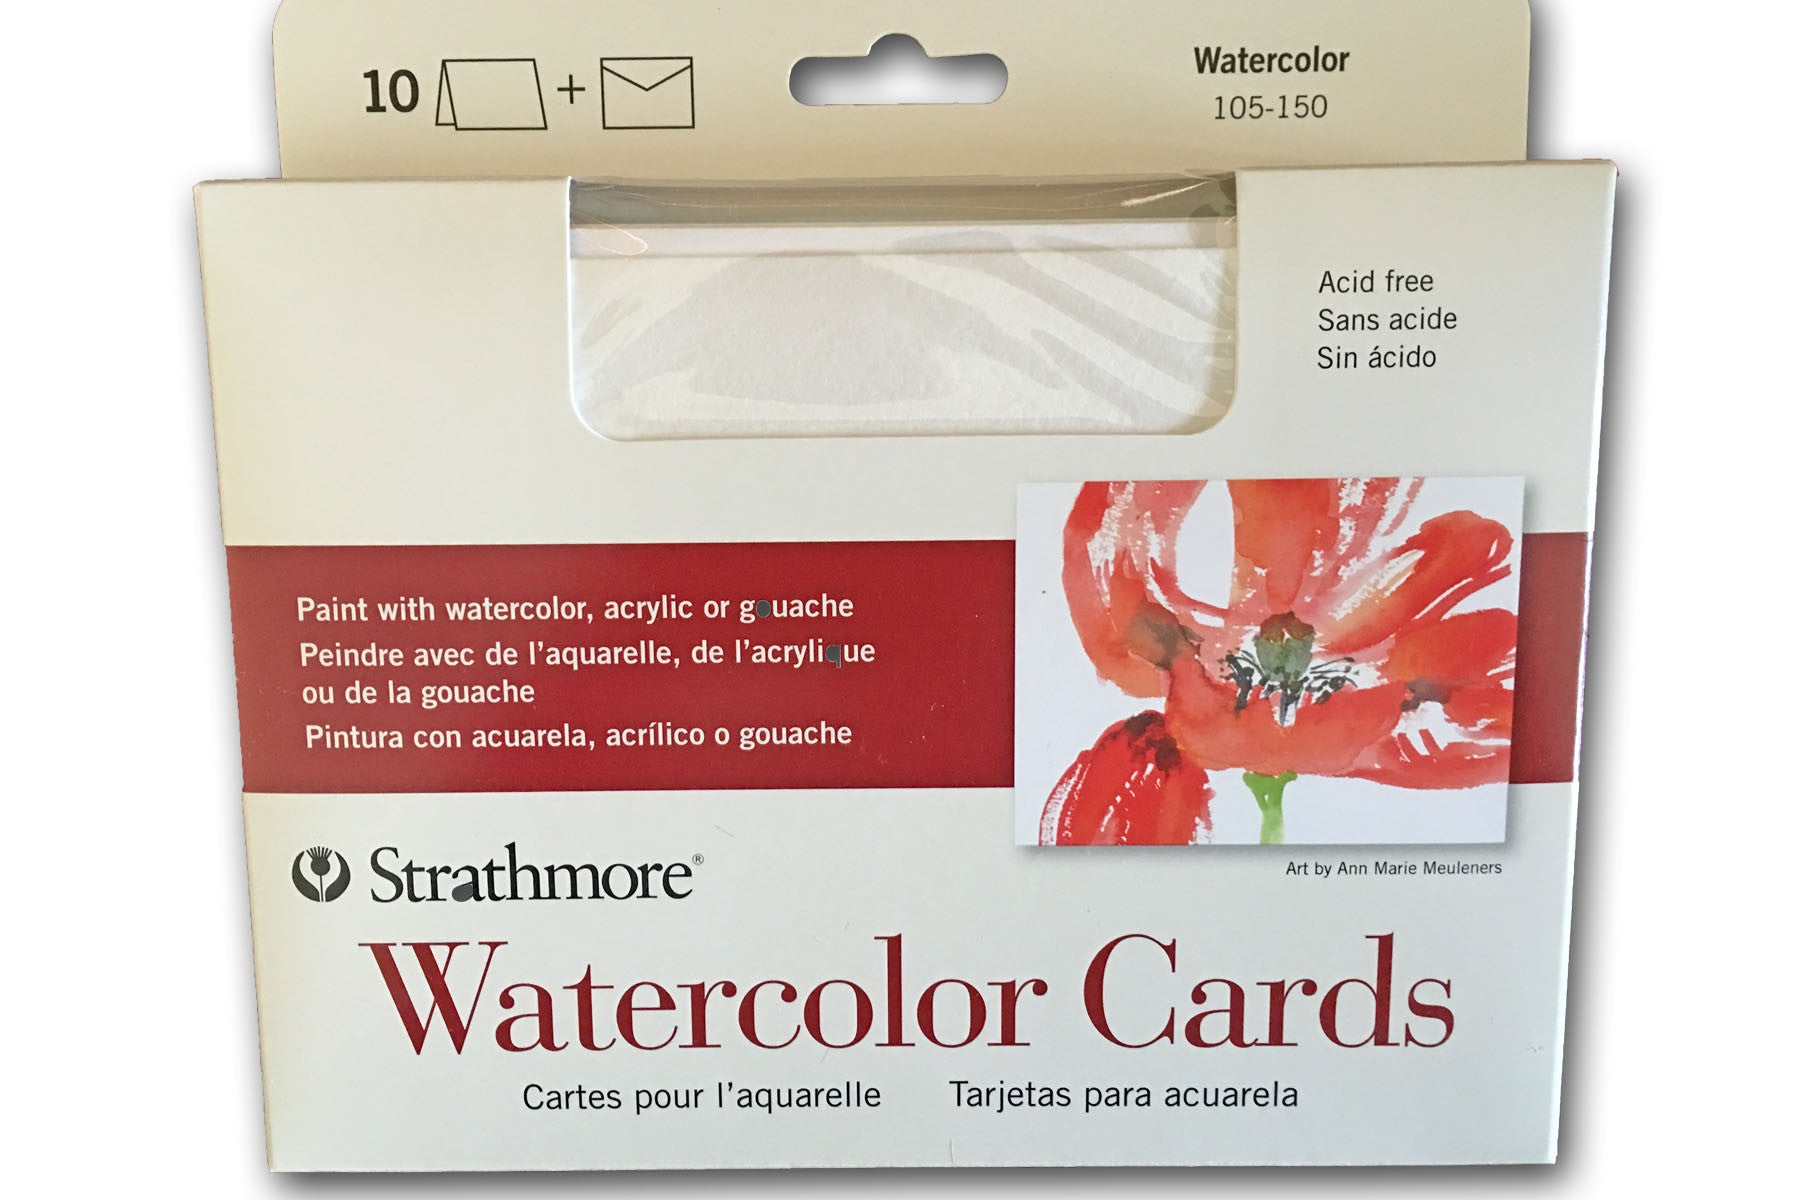 Can You Use a Light Box With Watercolor Paper? - Watercolor Corner